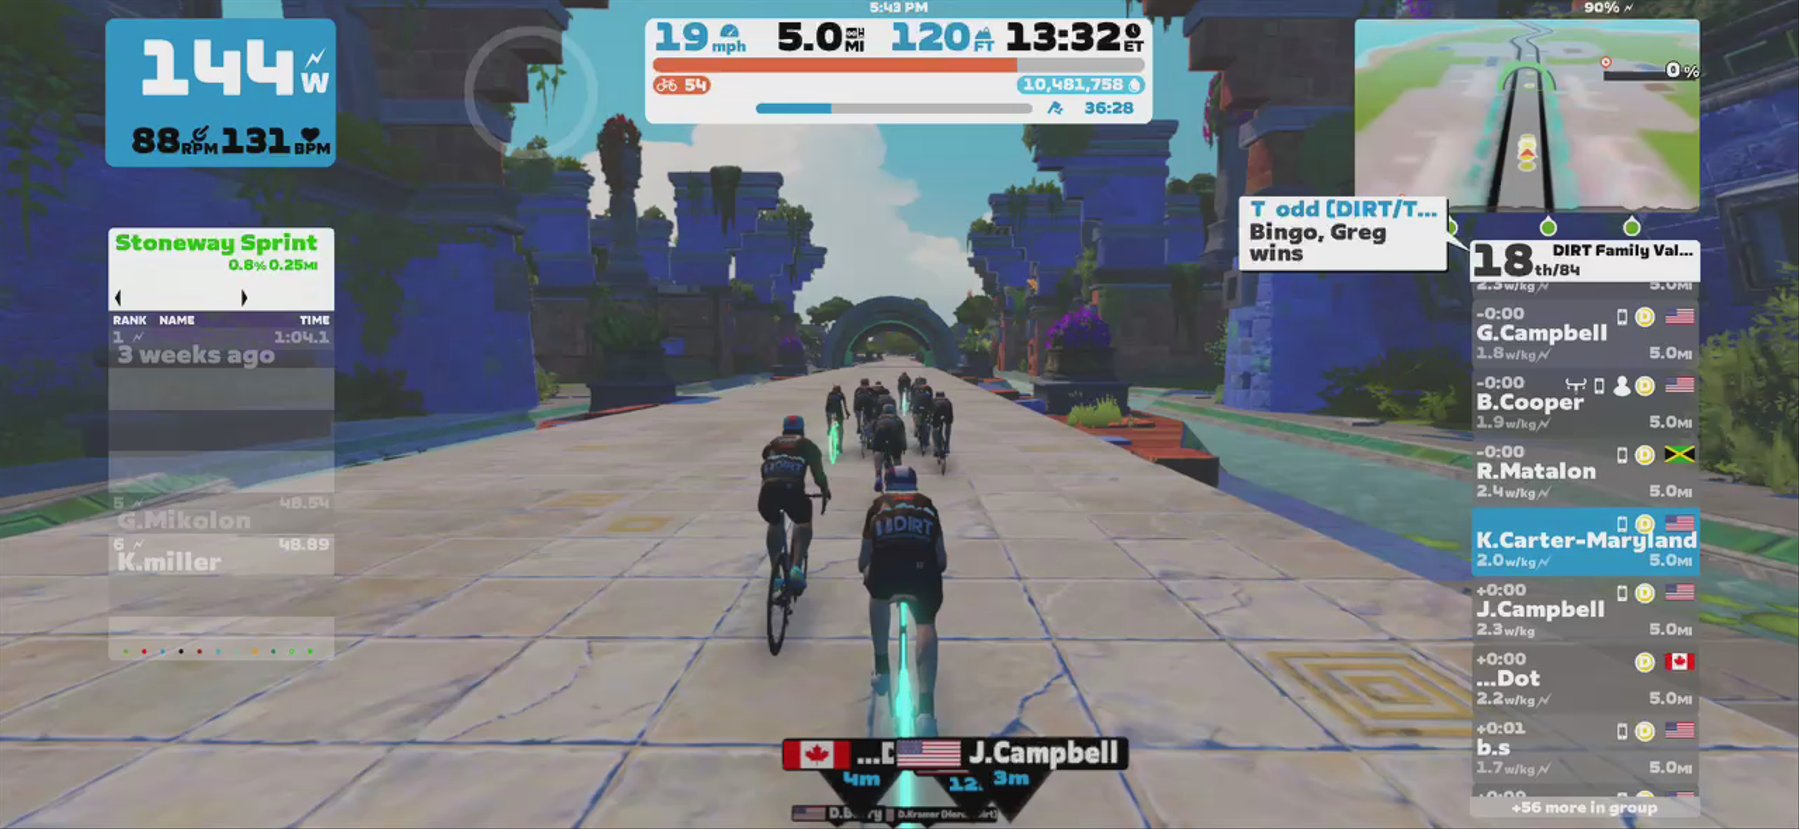 Zwift - Group Ride: DIRT Family Values Ride (D) on Coast Crusher in Watopia